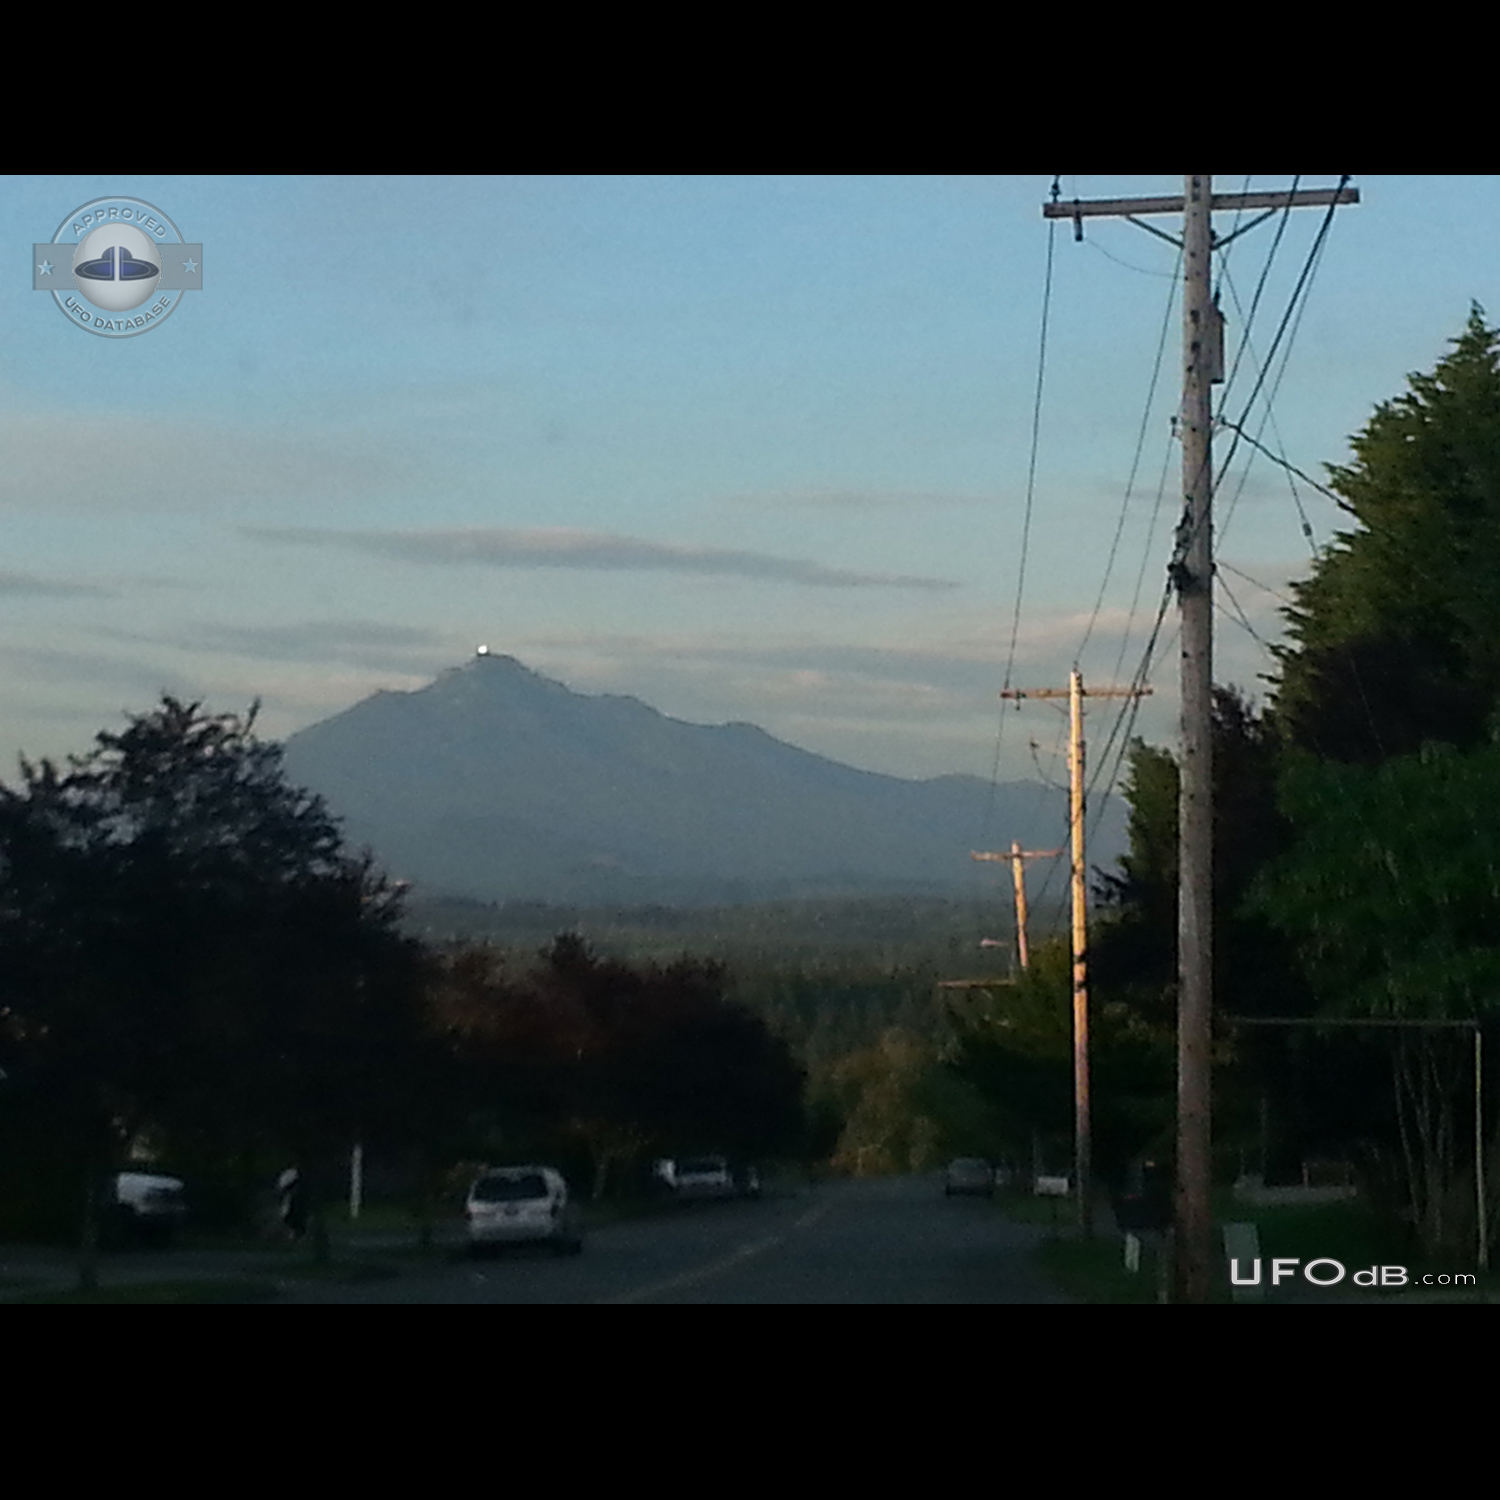 Looked to mountain. saw gigantic hovering ufo - Lake Stevens USA 2015 UFO Picture #703-1